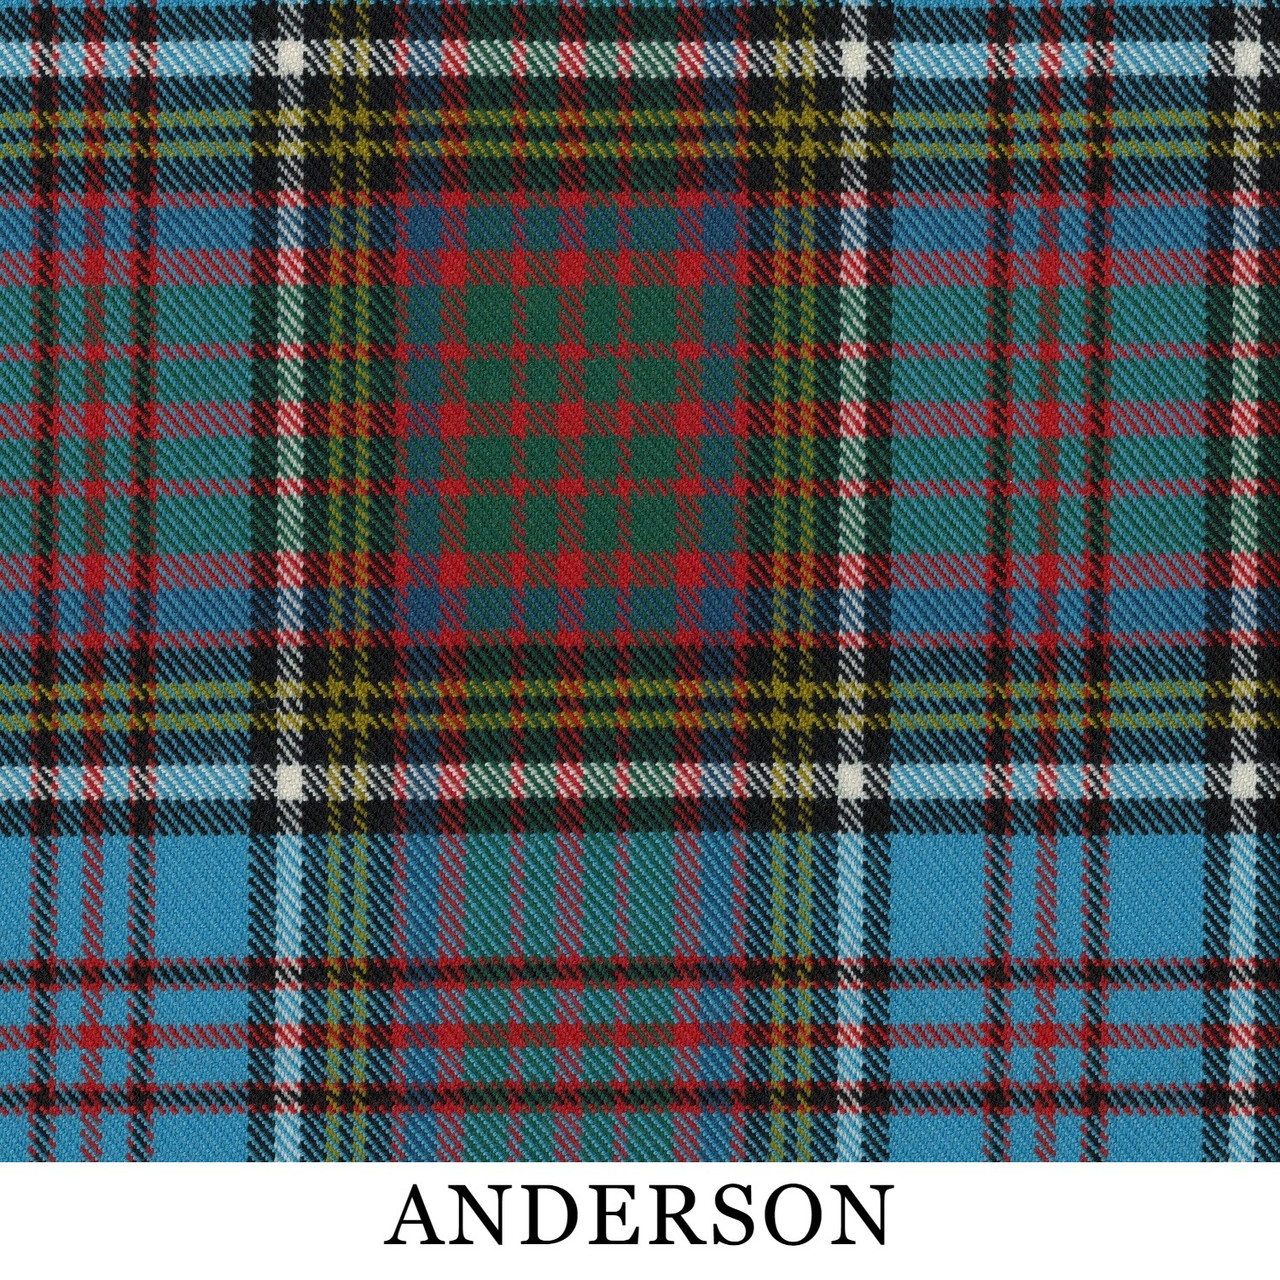 Tartan and Tweed Car Upholstery Fabric Guide